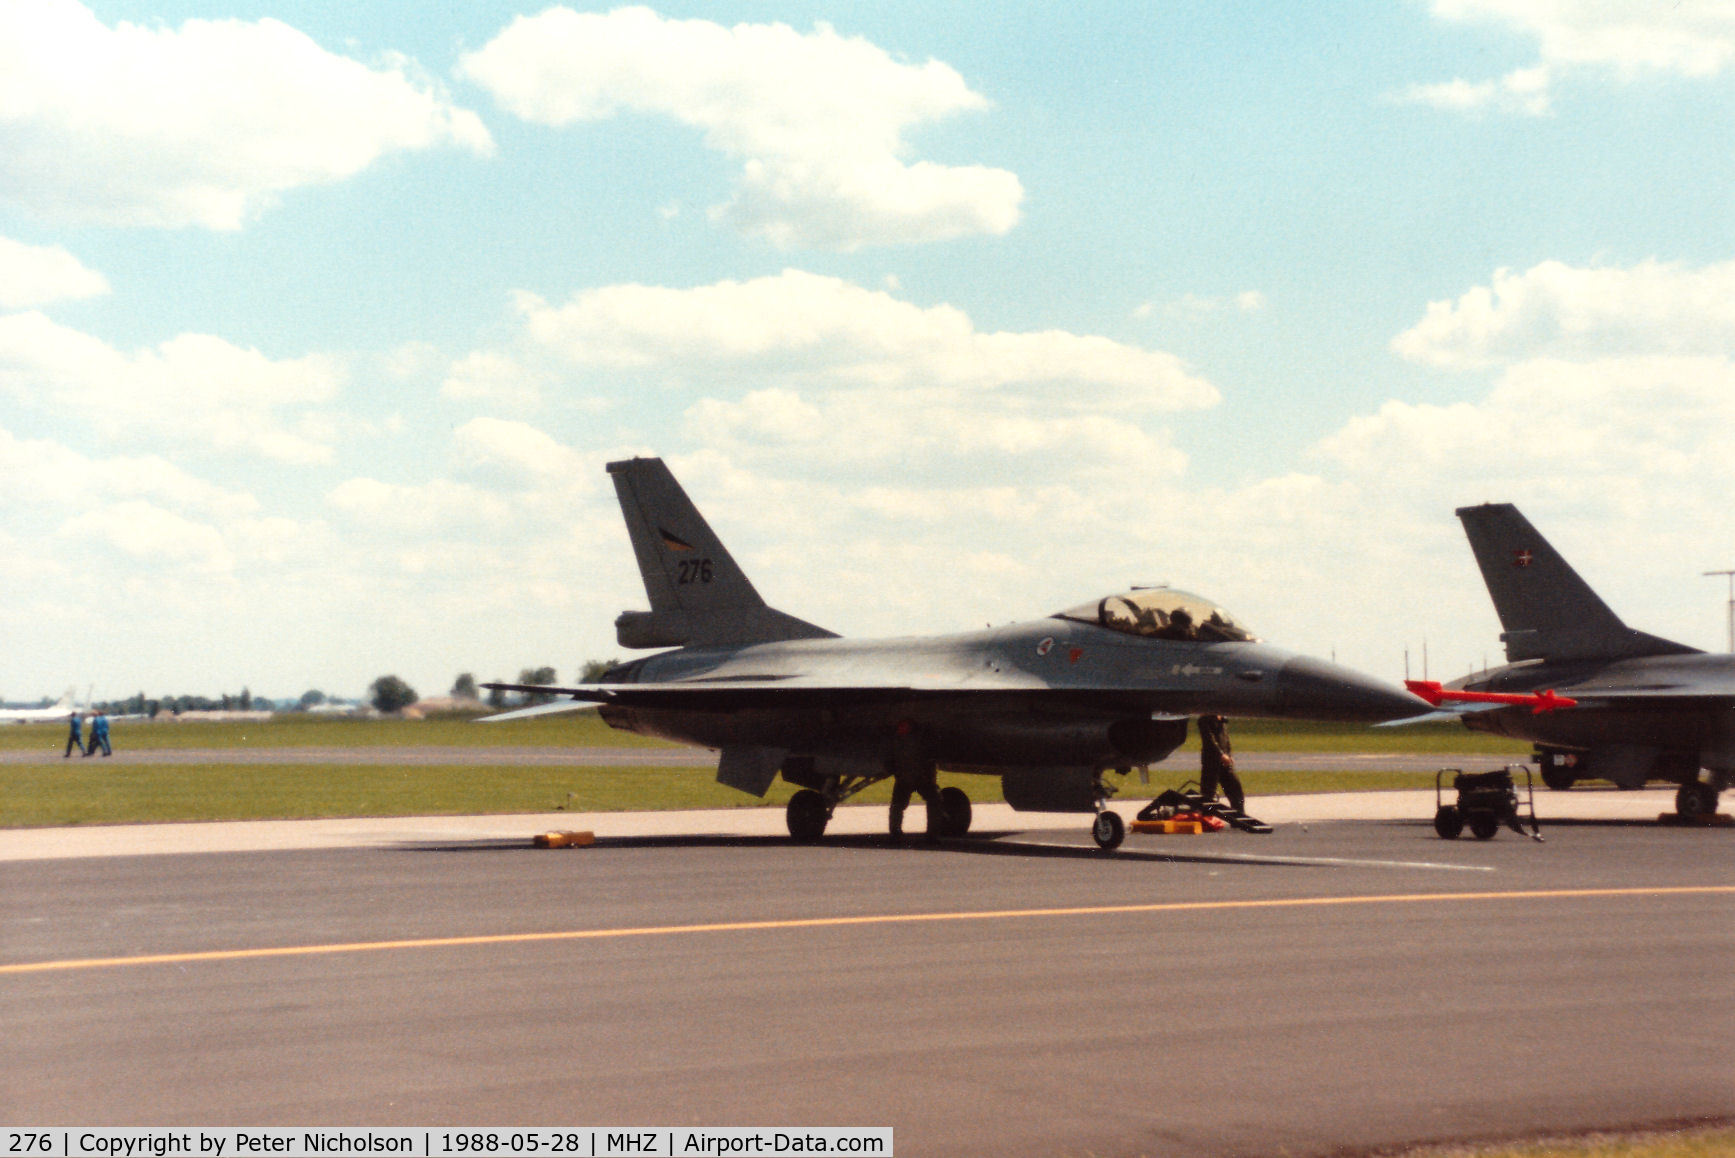 276, 1980 Fokker F-16AM Fighting Falcon C/N 6K-5, F-16A Falcon of 332 Skv Royal Norwegian Air Force on the flight-line at the 1988 RAF Mildenhall Air Fete.